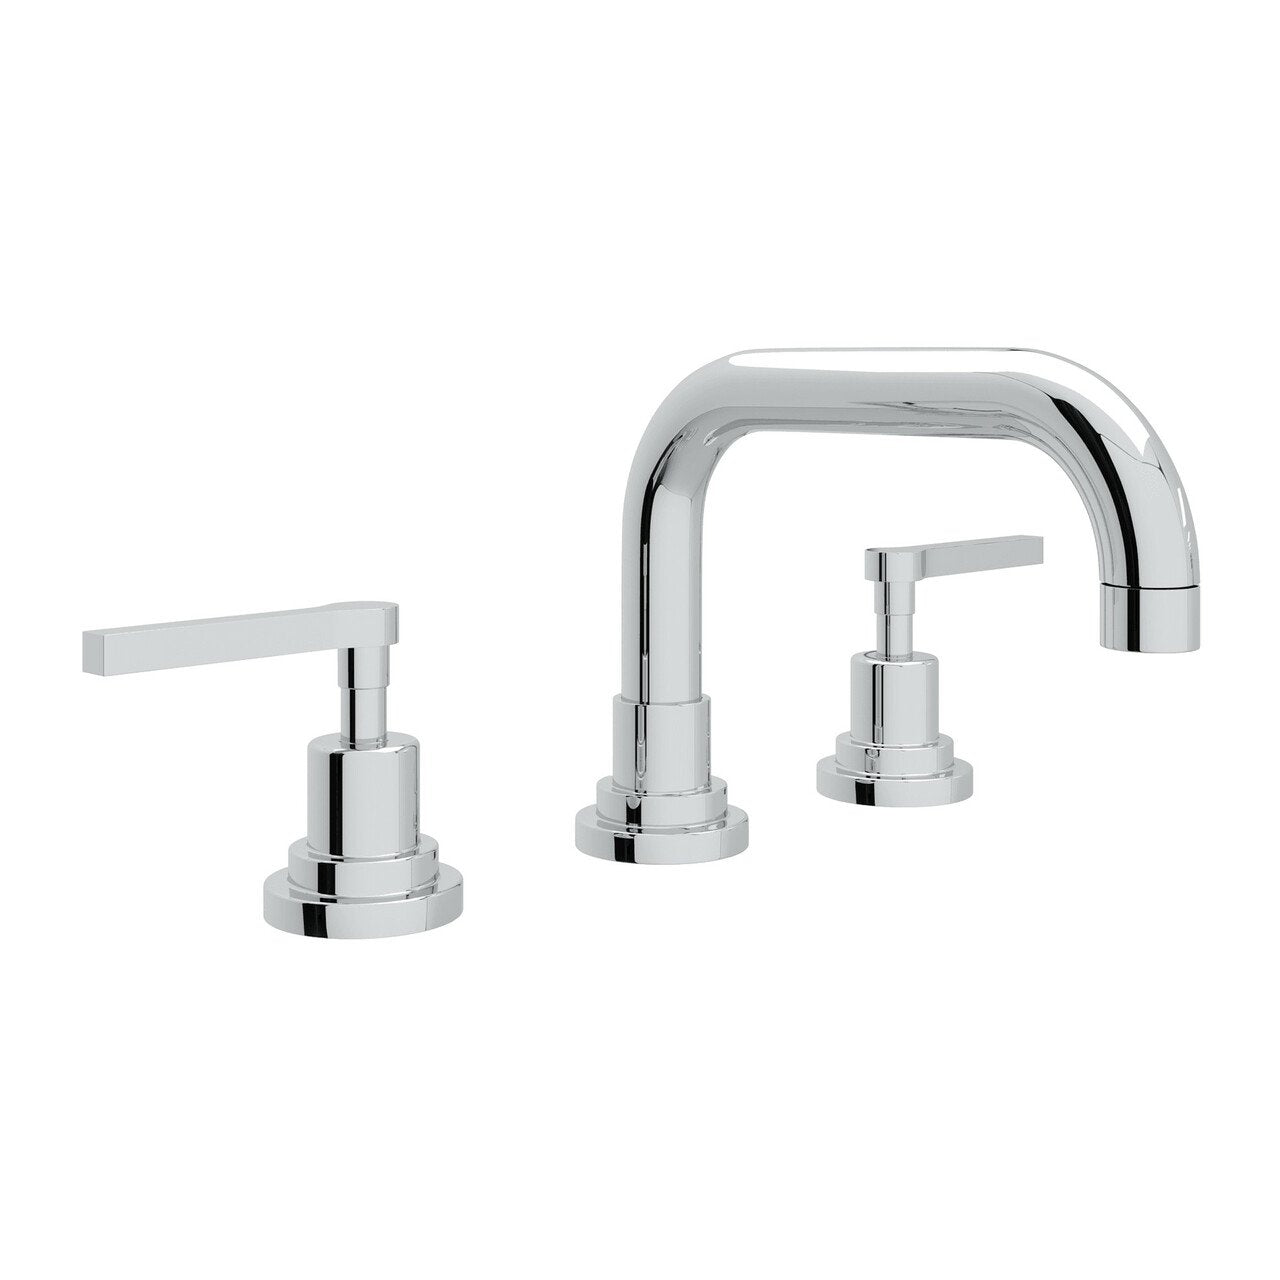 ROHL Lombardia U-Spout Widespread Bathroom Faucet - BNGBath